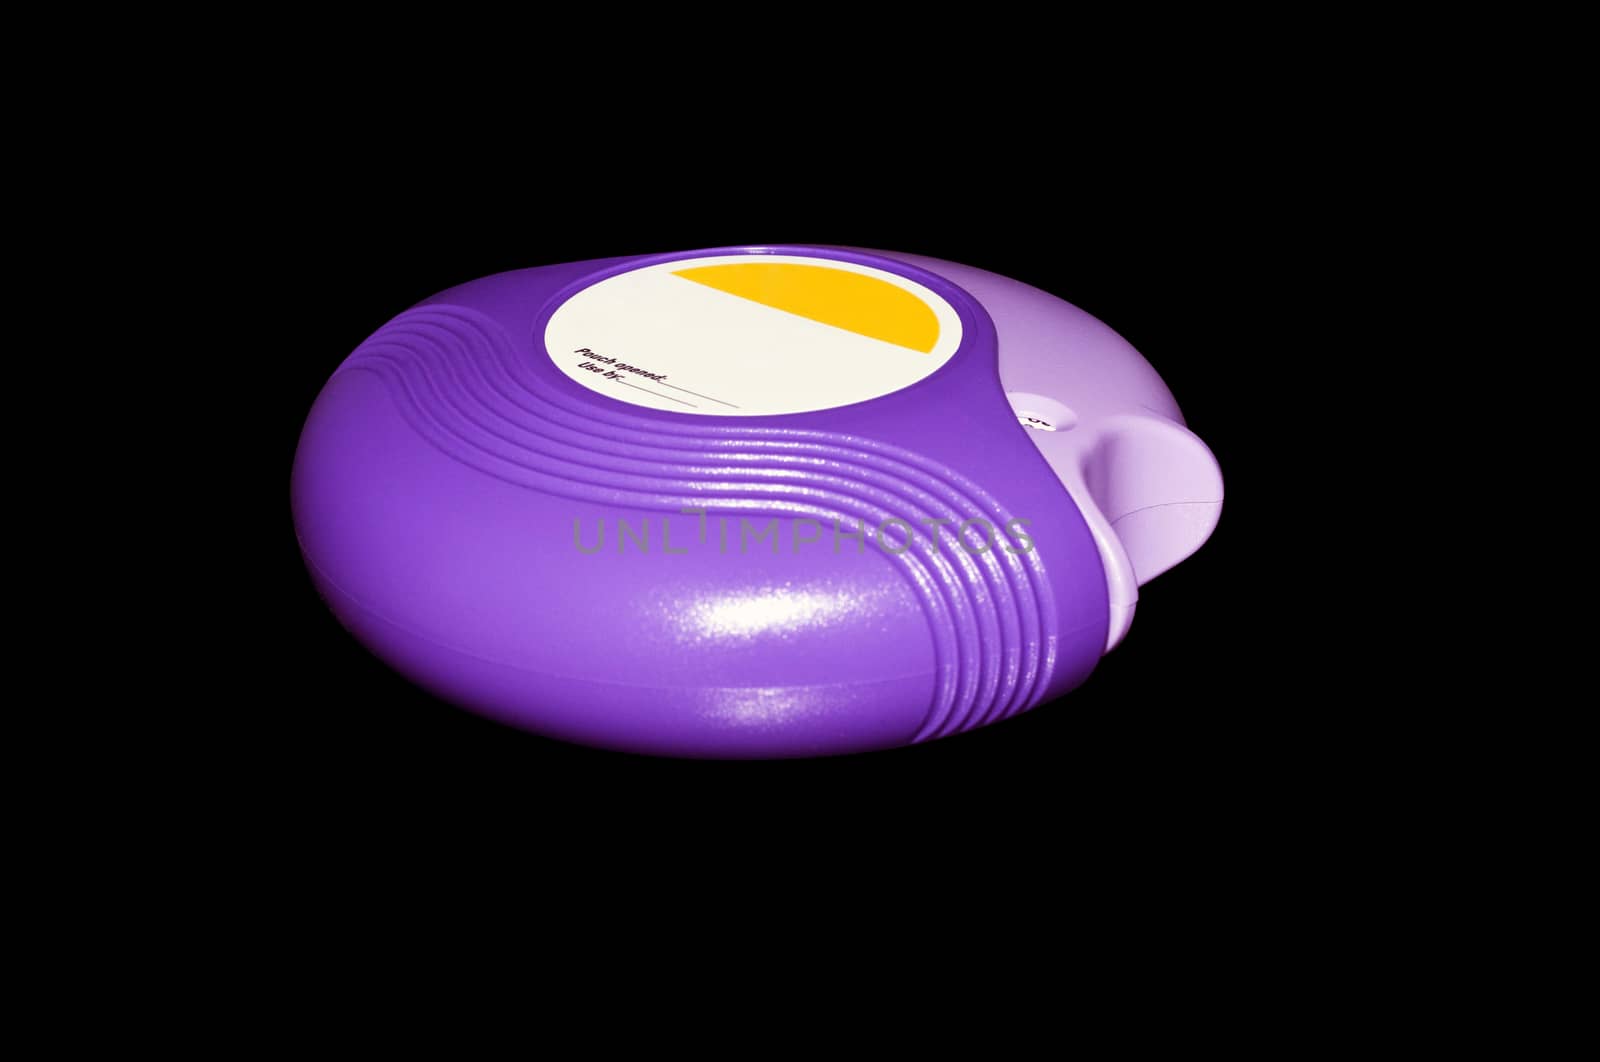 Plastic inhaler for daily treatment of COPD and Emphysema. Isolated on a black background with a clipping path.